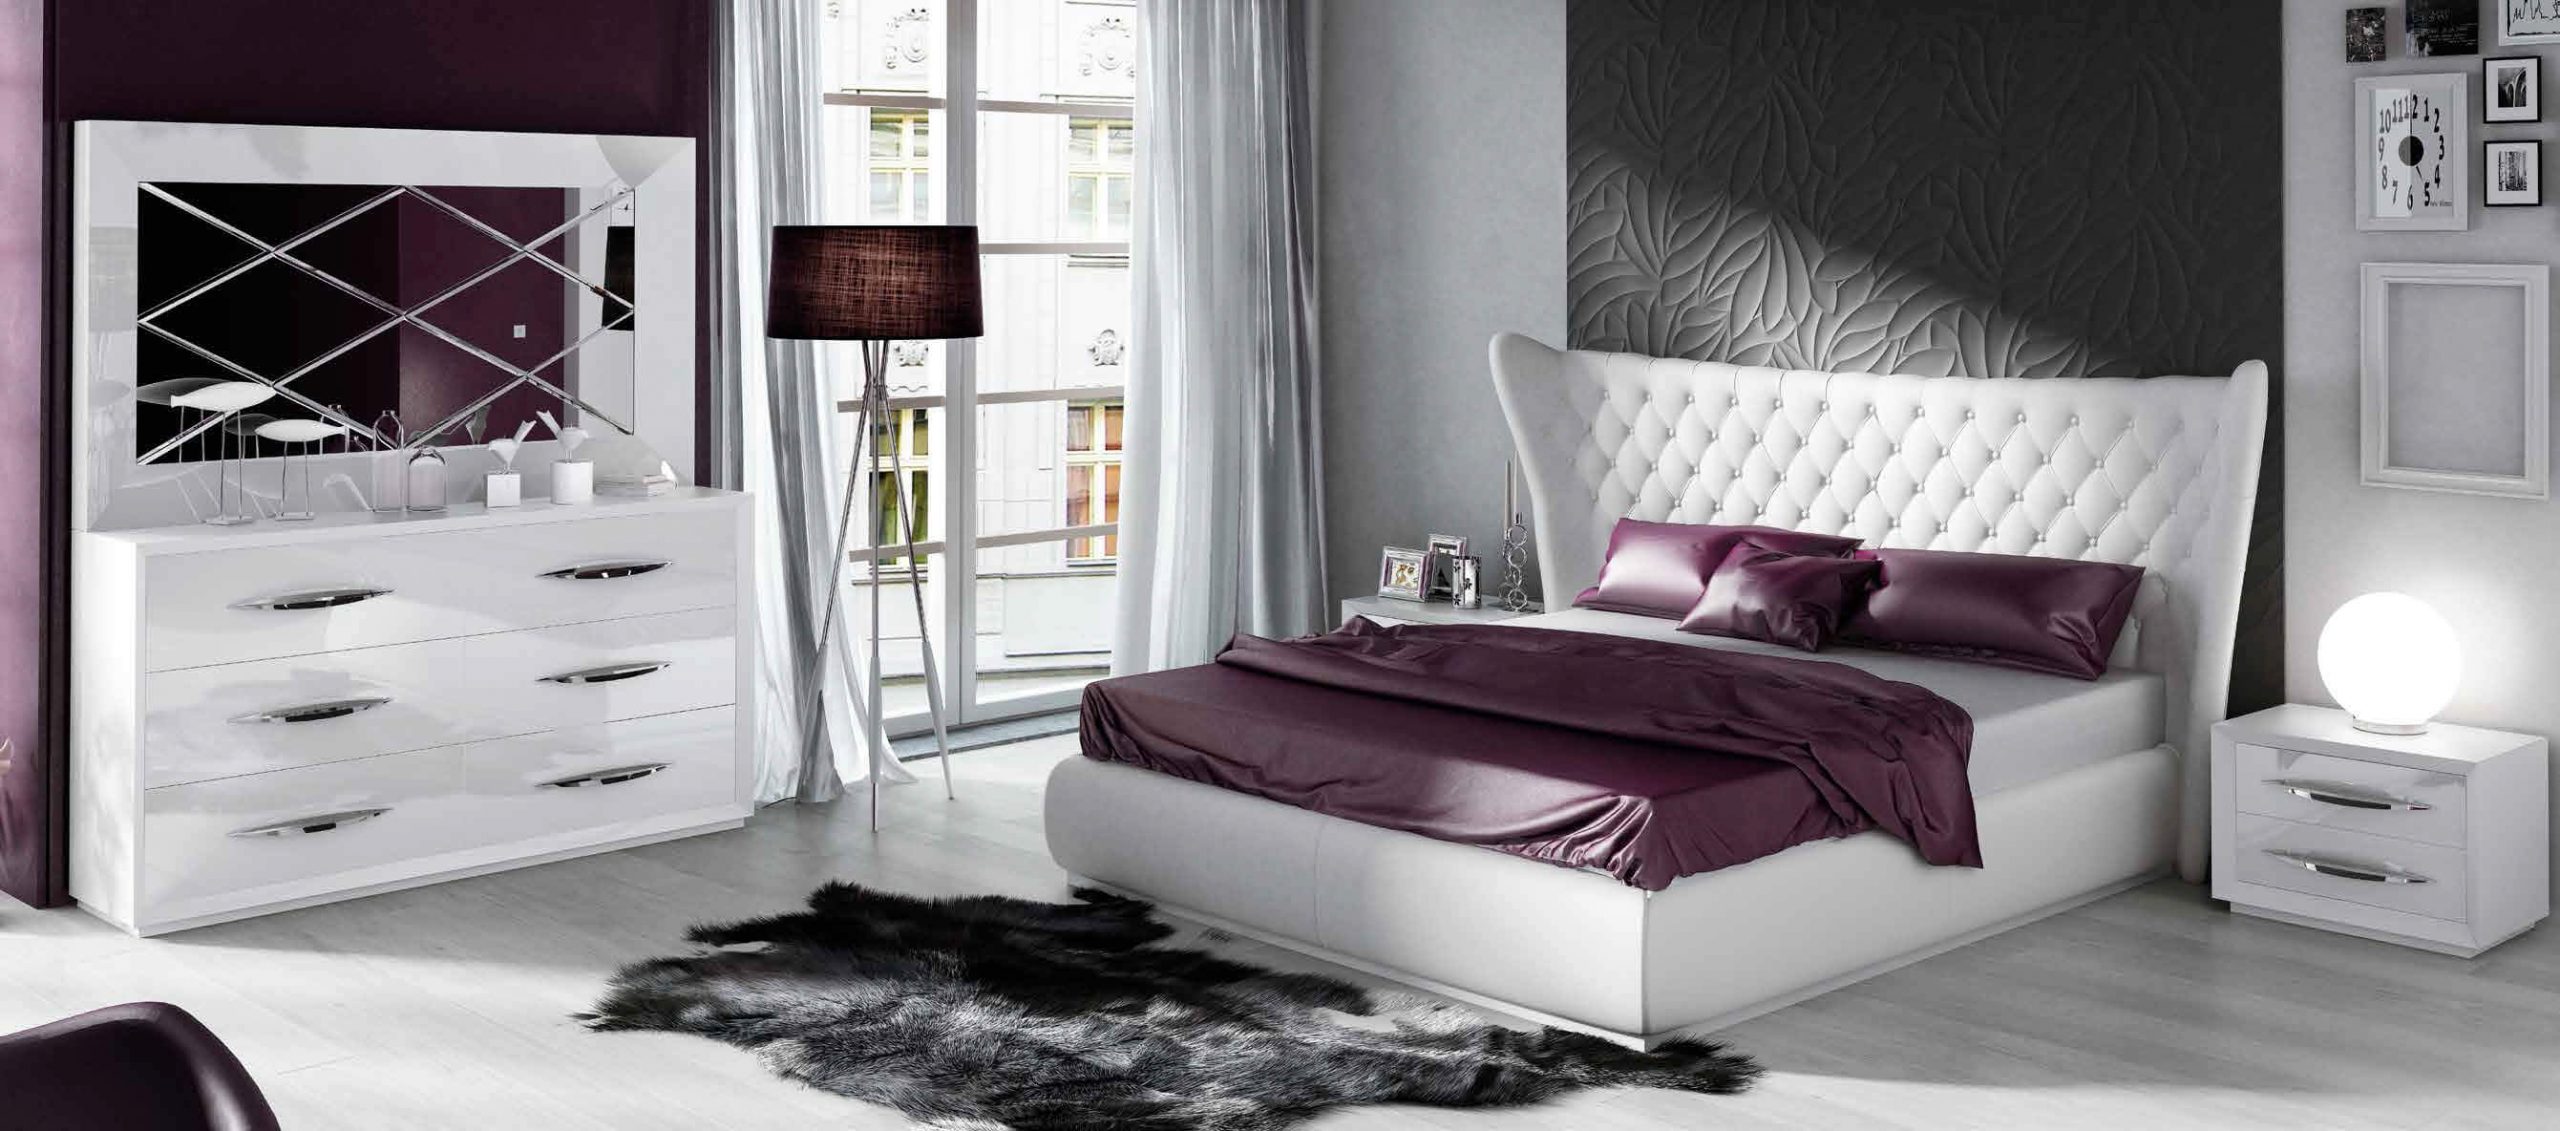 Luxury bed 2 - Imperial Furniture